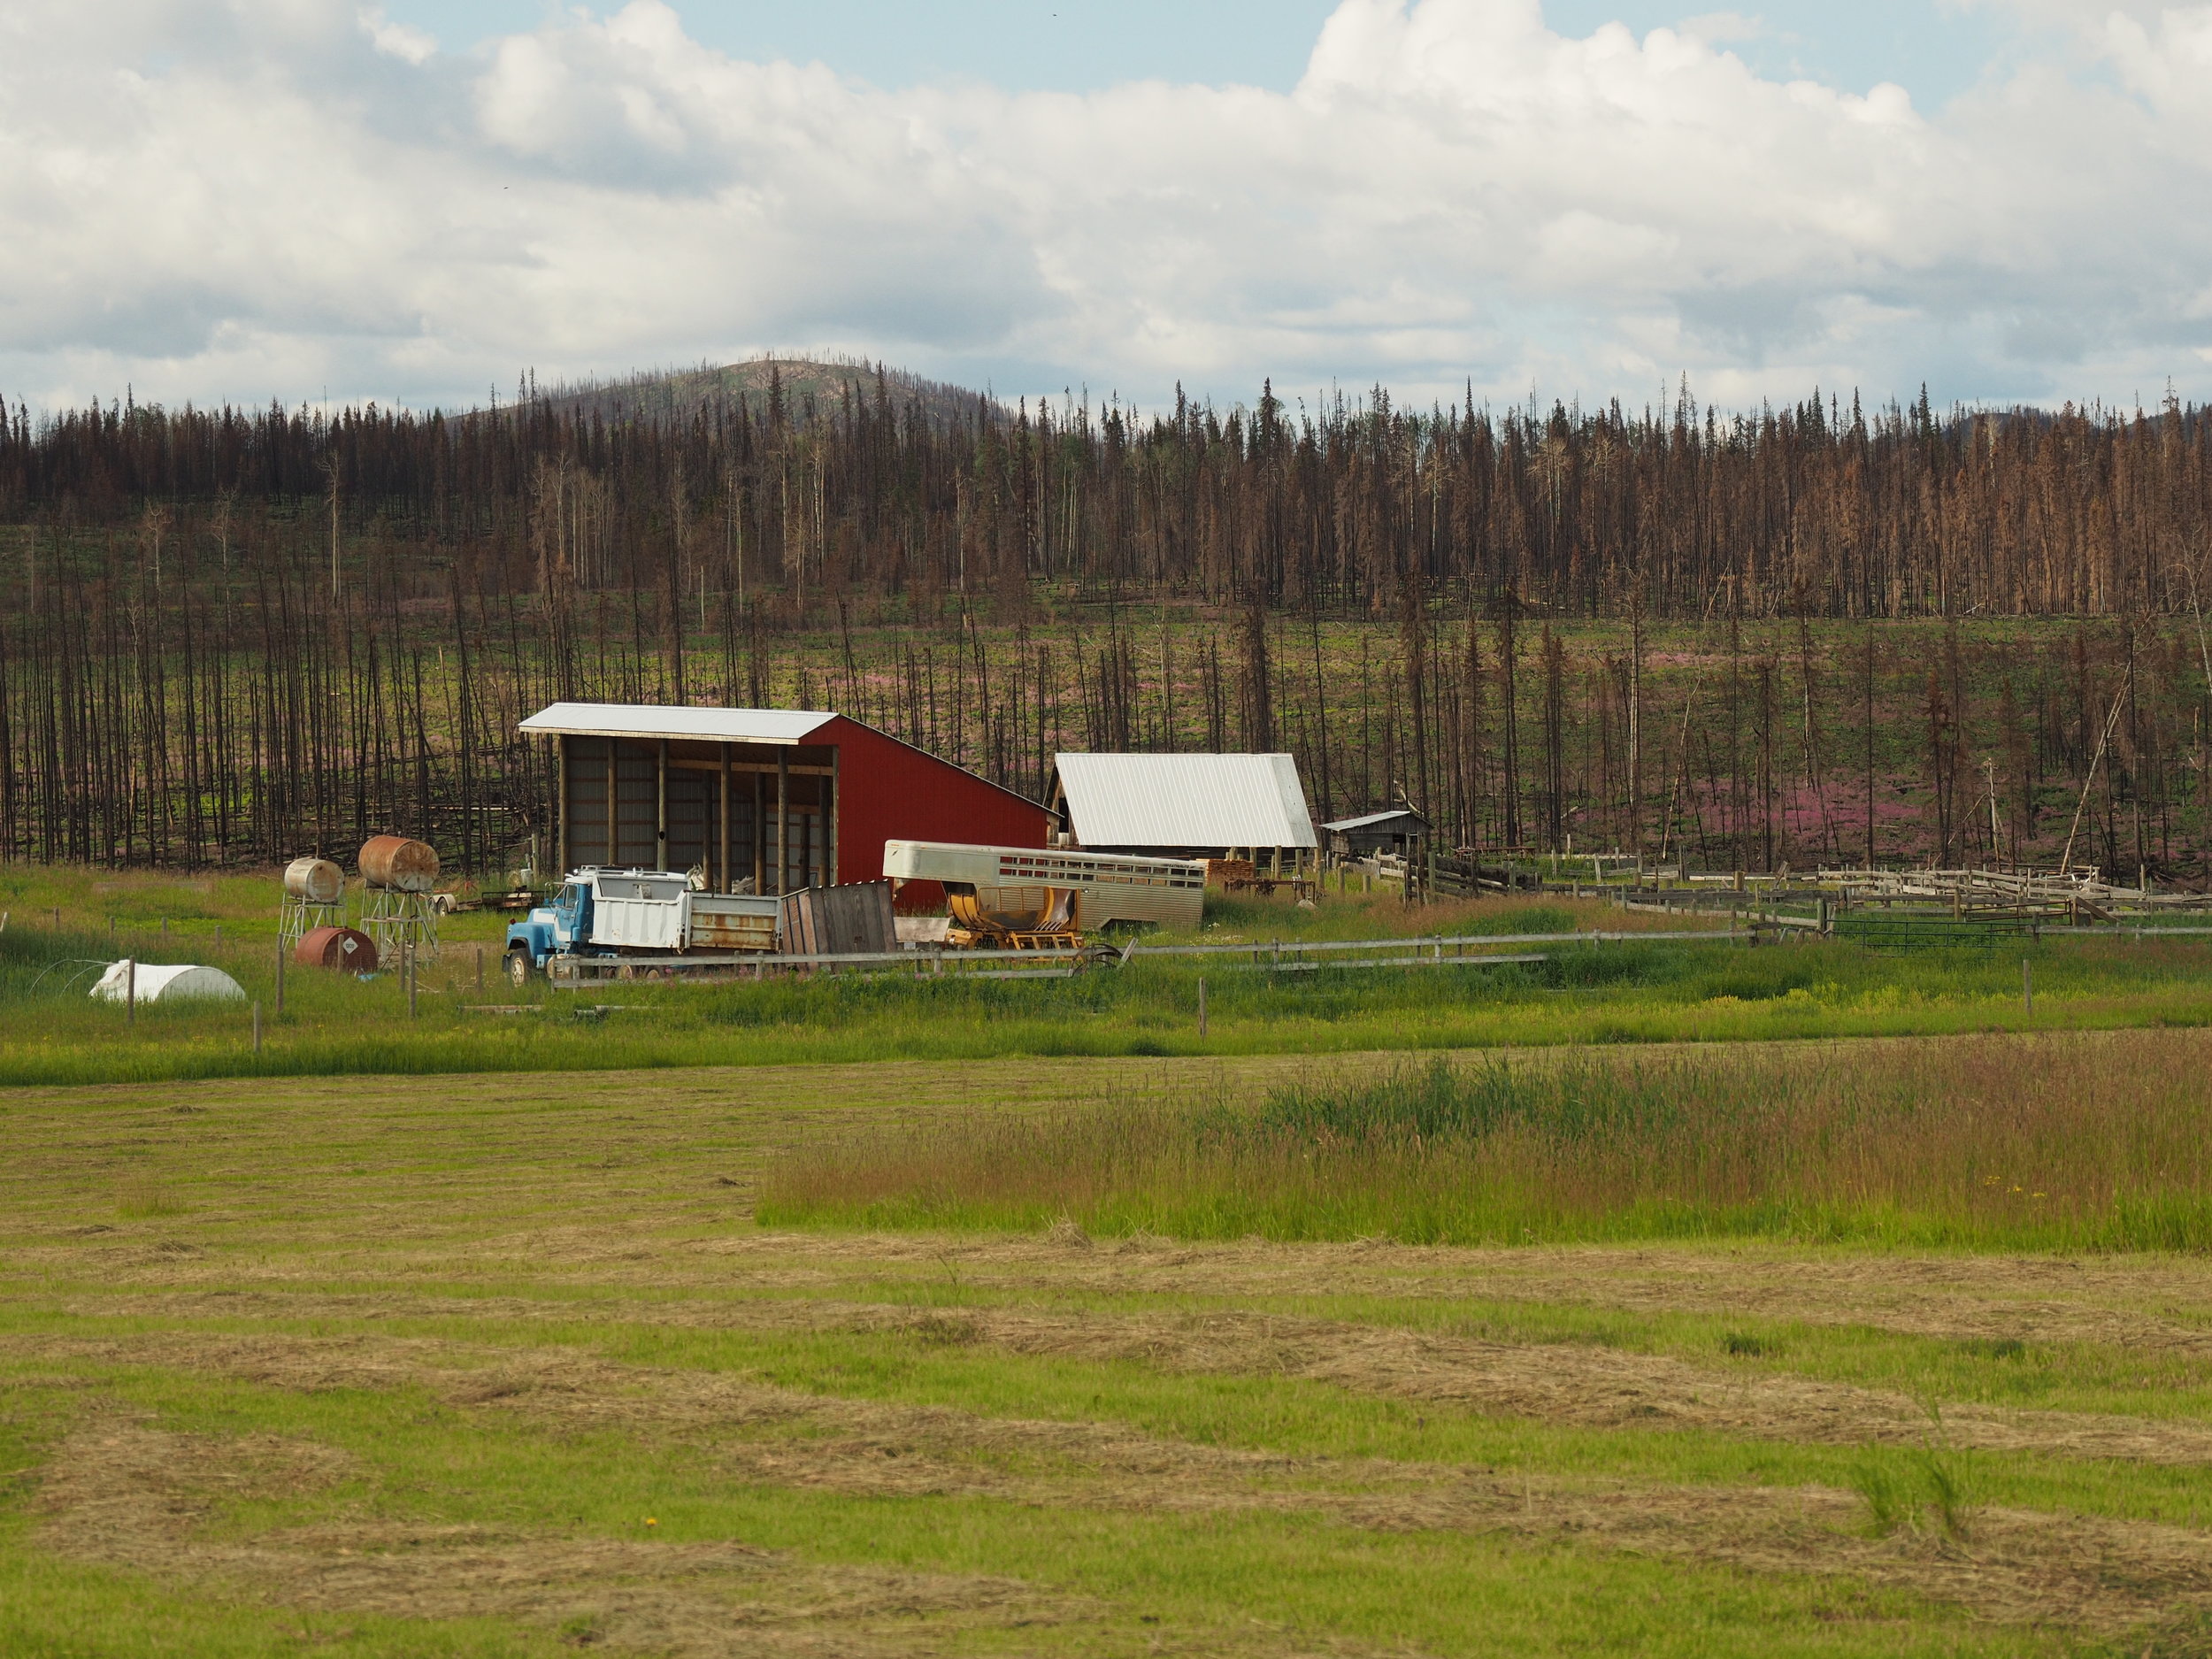 A farm and a timber lot